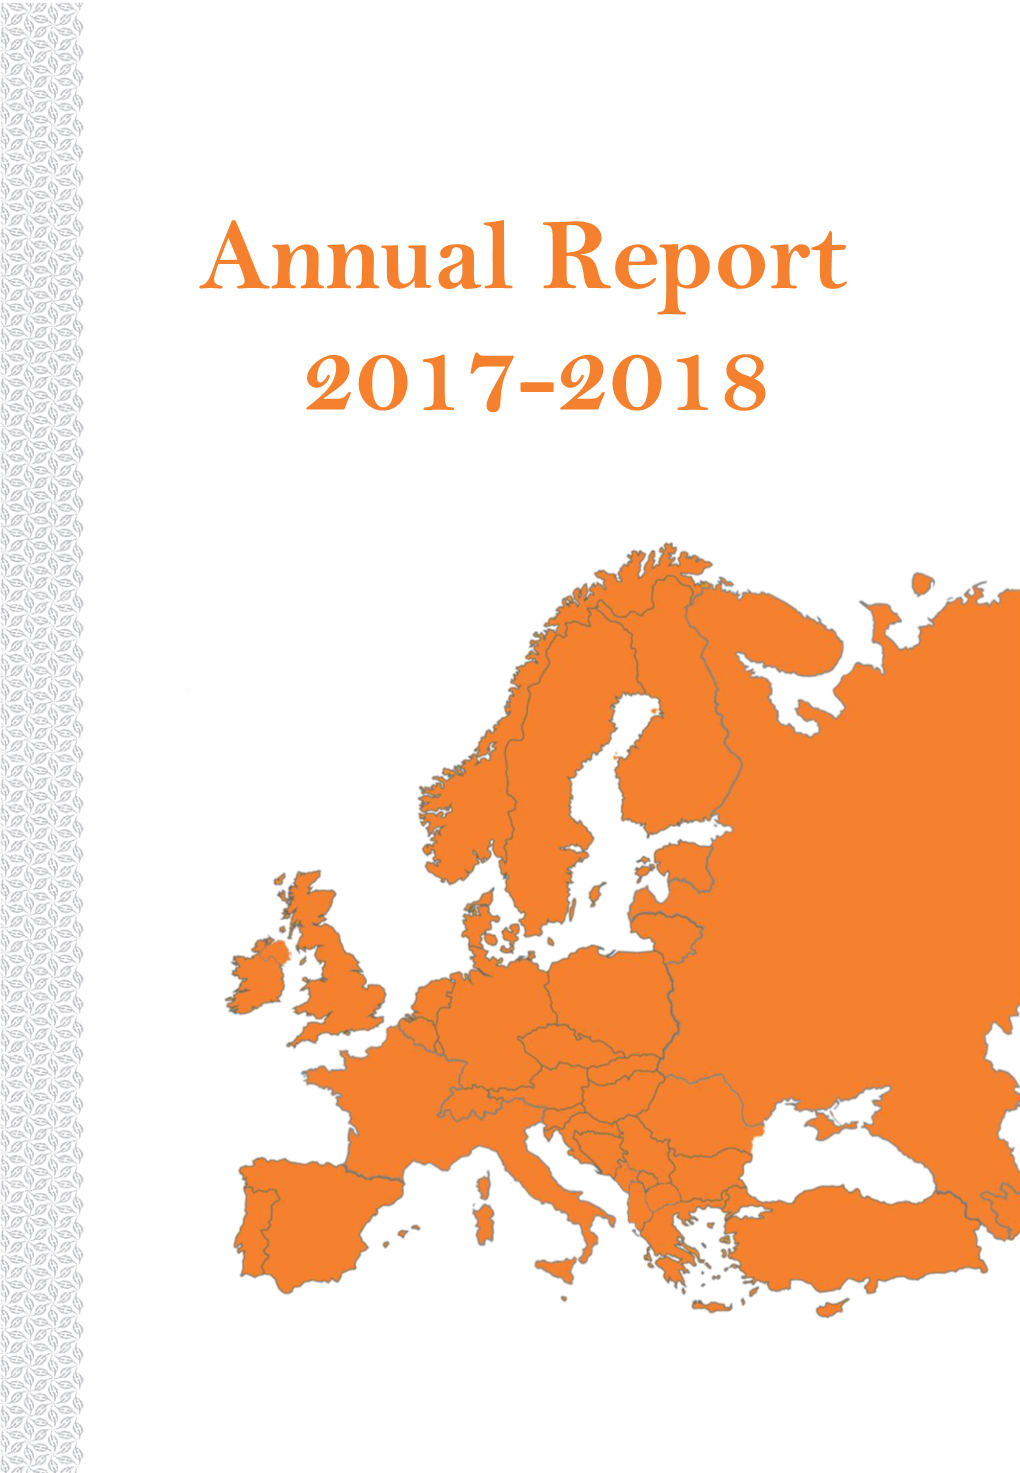 Annual Report 2017-2018 Introduction to EFPSA